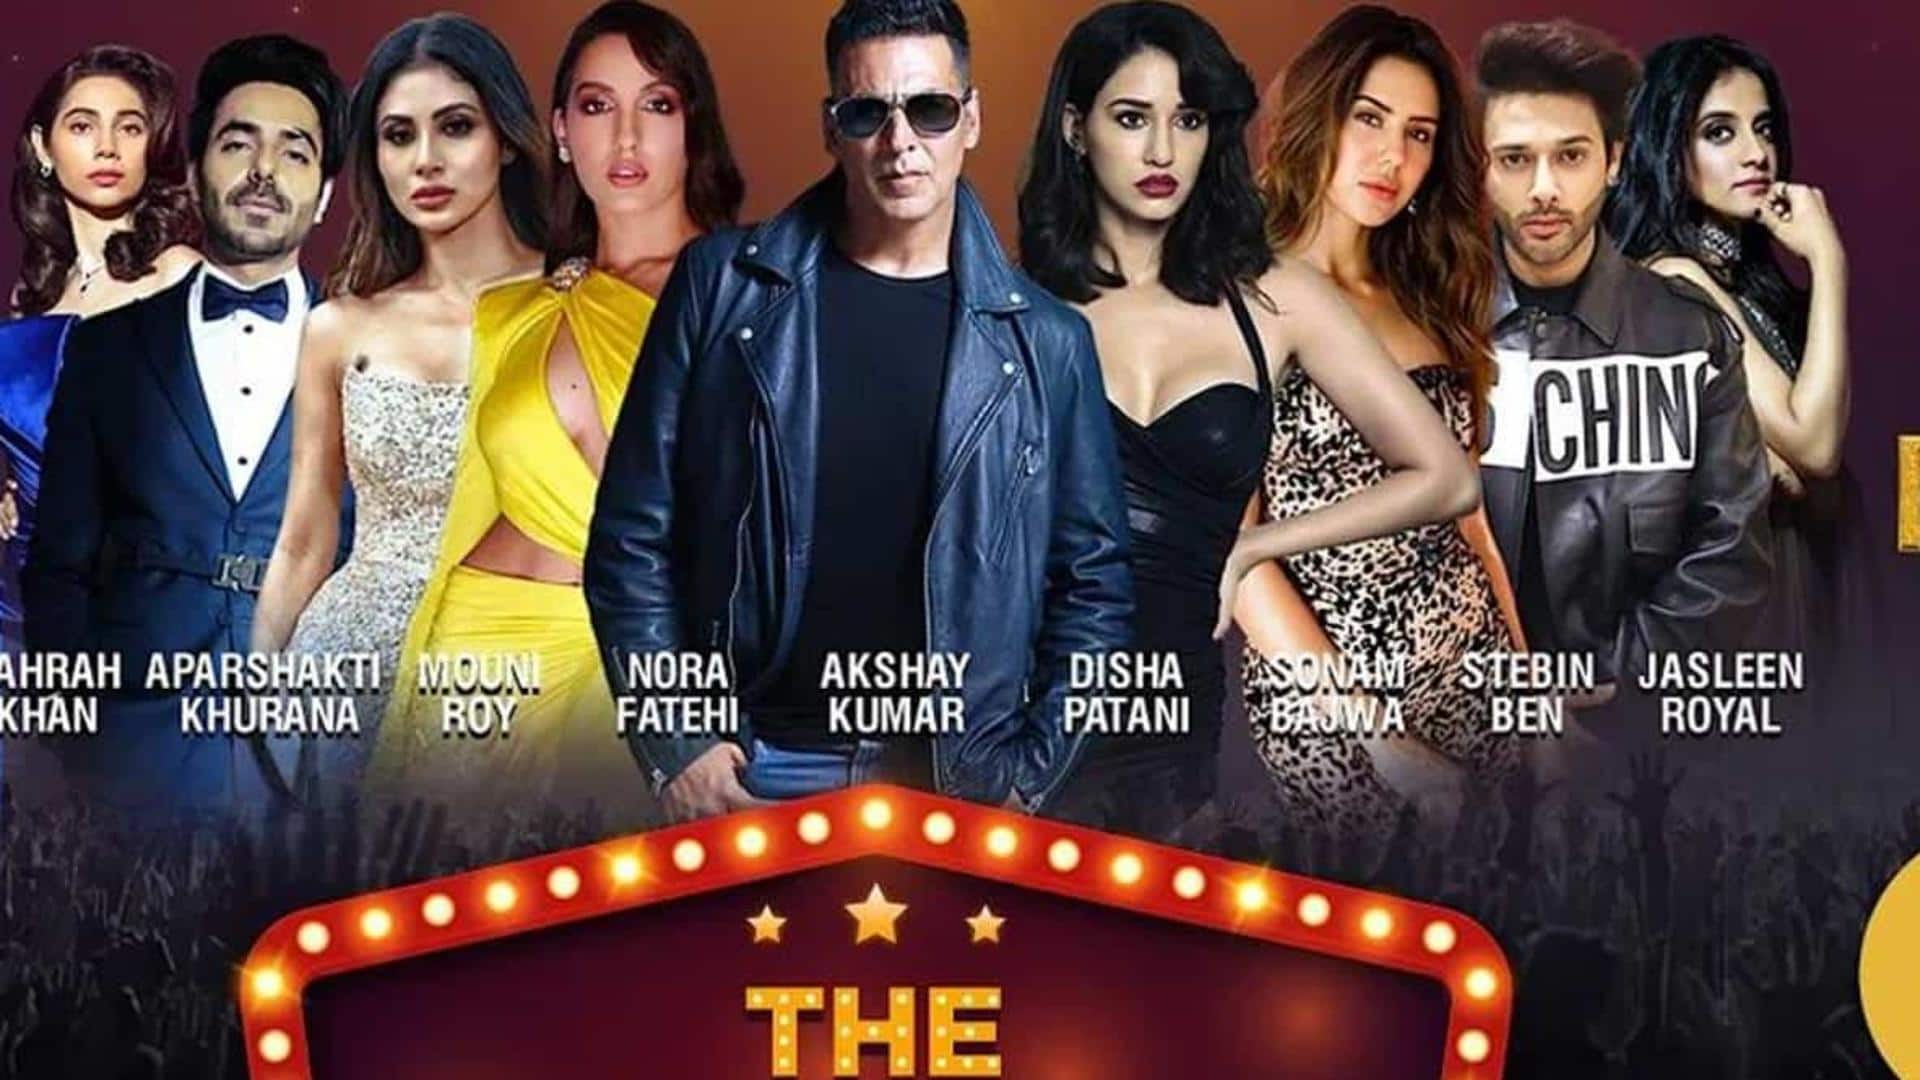 US: Akshay Kumar-headlined show 'The Entertainers' canceled in New Jersey